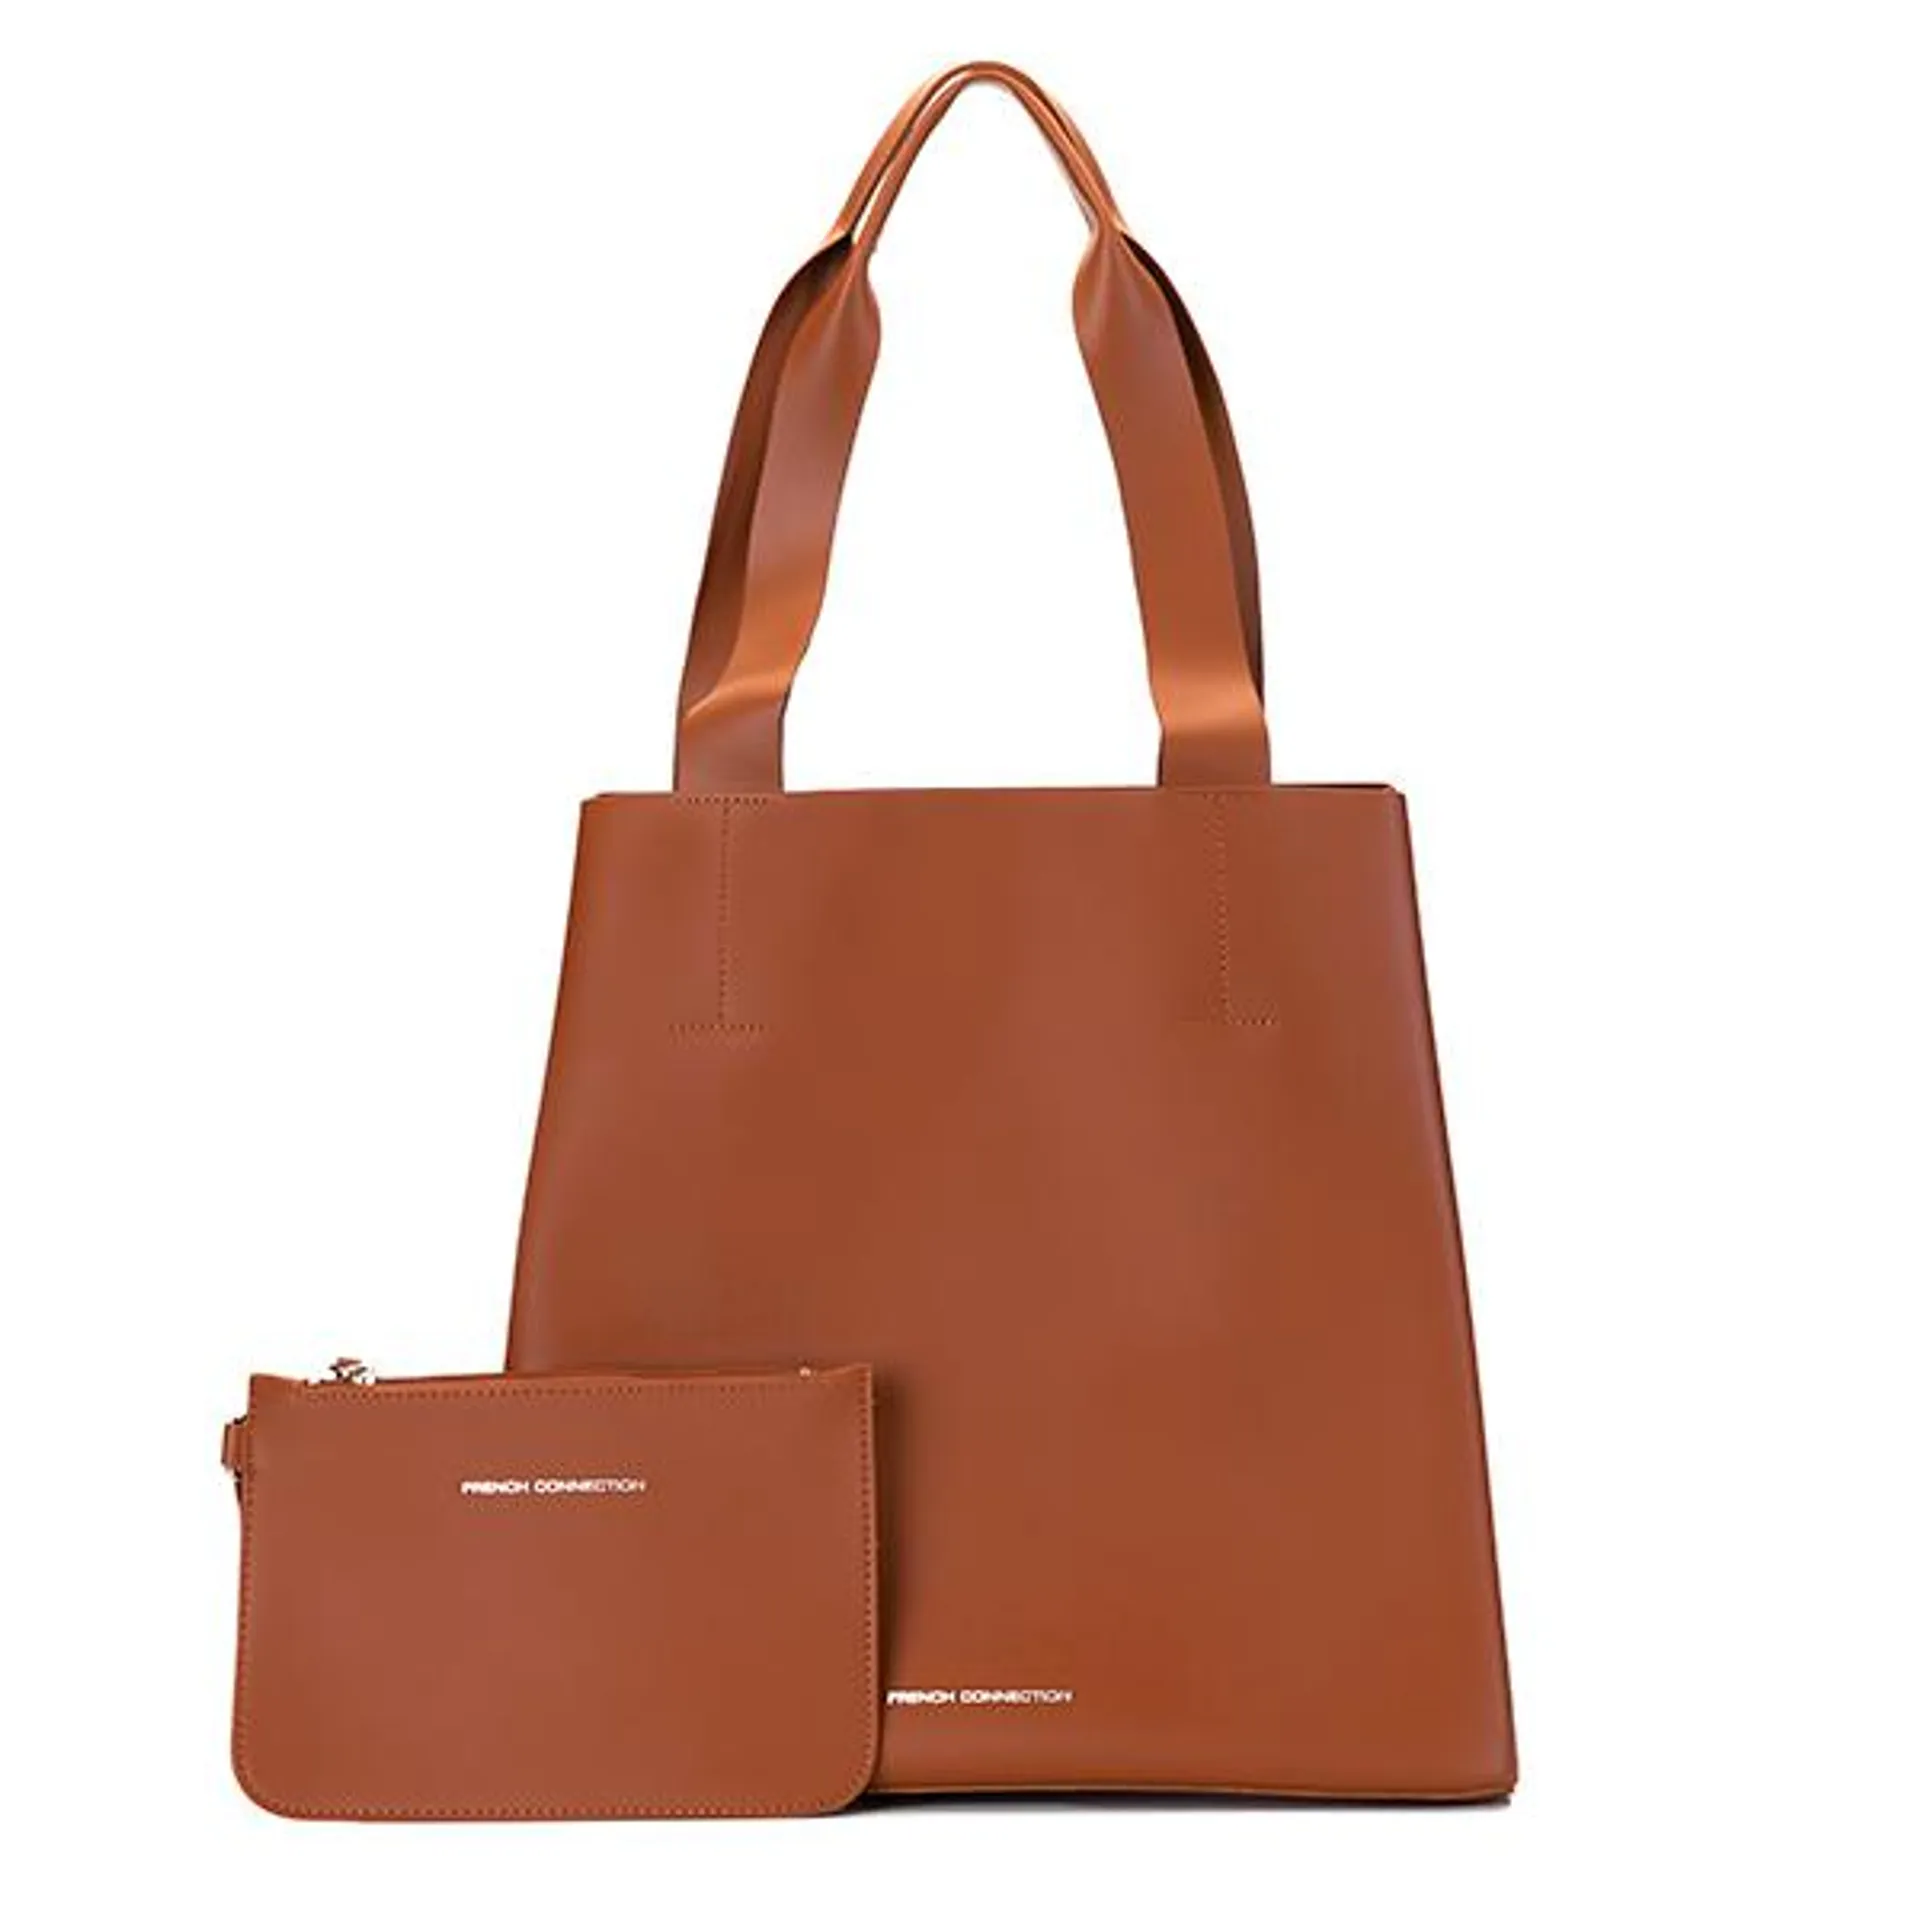 French Connection Tote Bag with Pouch